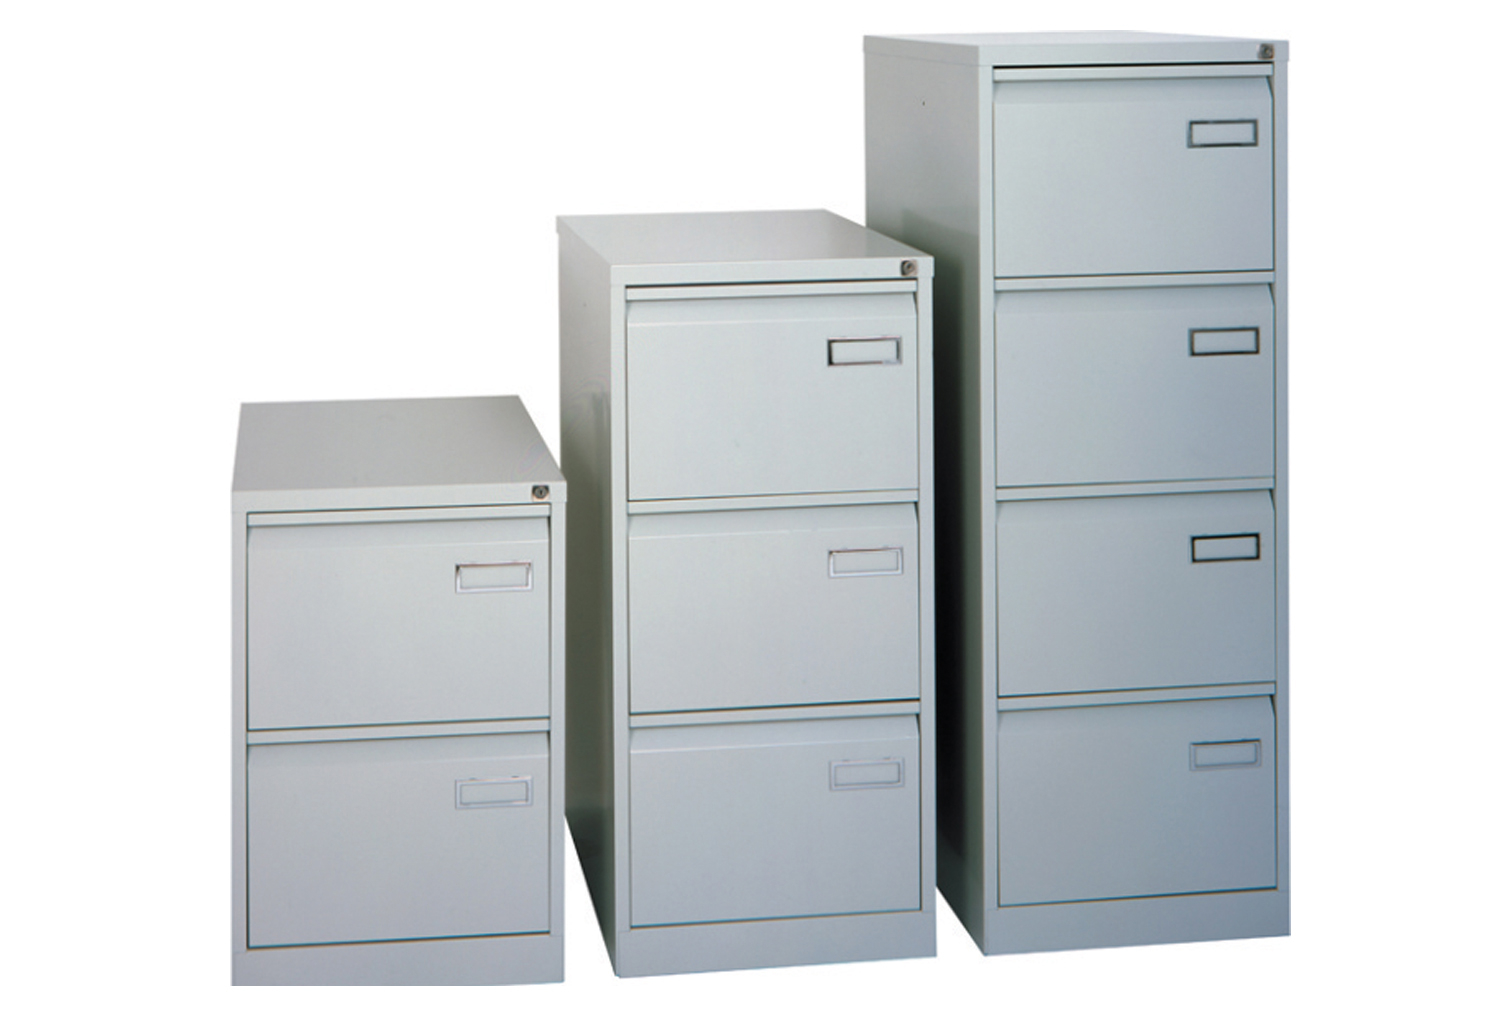 Bisley Executive PSF Filing Cabinet, 4 Drawer - 47wx62dx132h (cm), White, Fully Installed